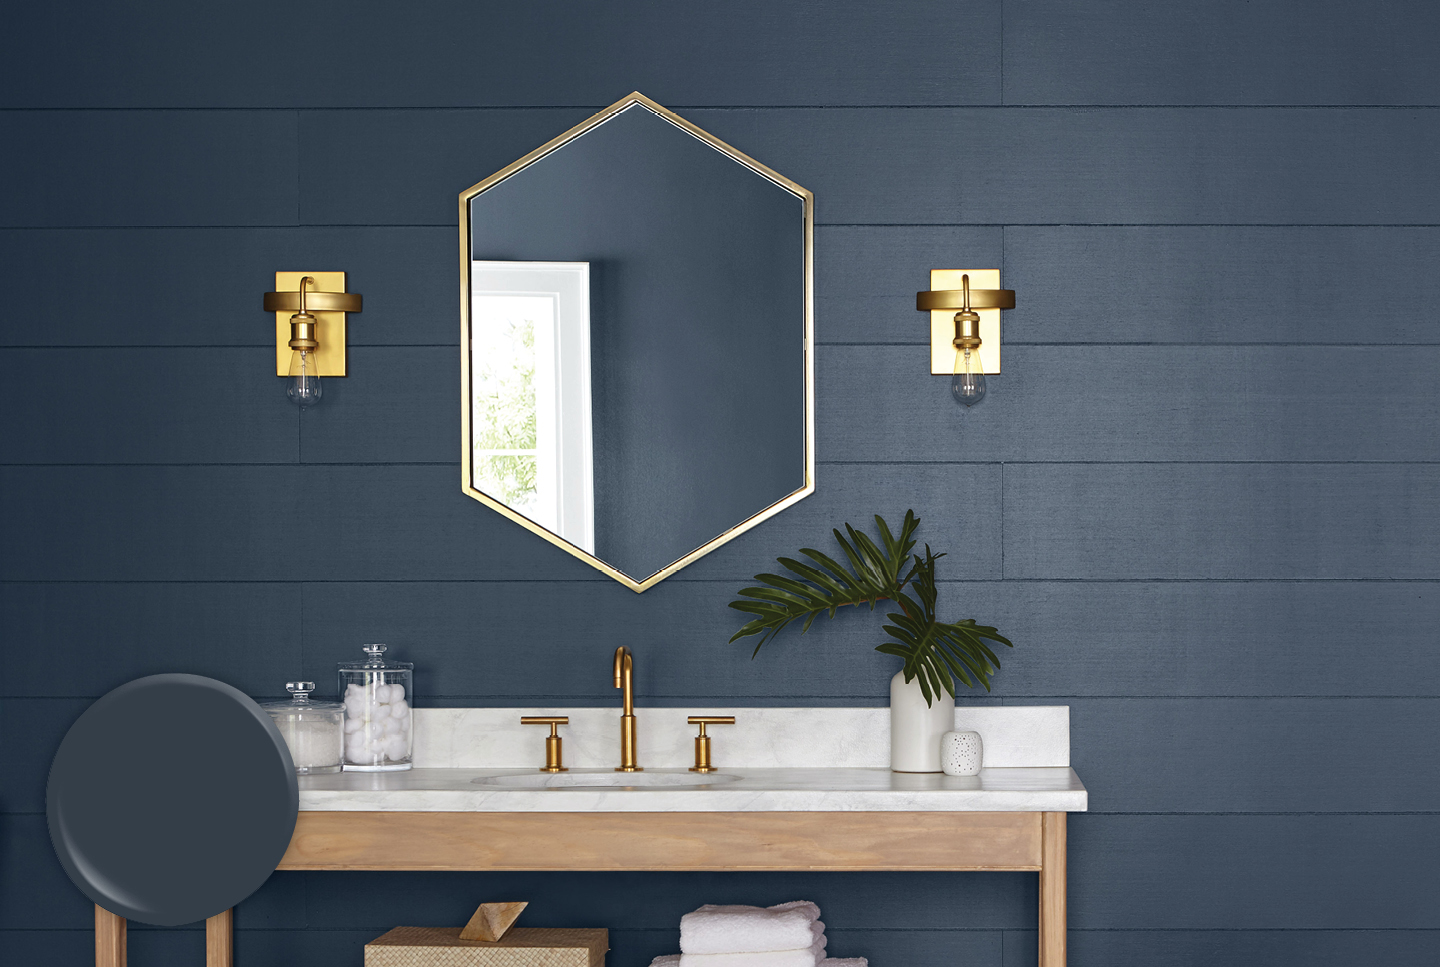 Horizontally paneled bathroom wall in Gotham Gray, with sleek wood and marble vanity featuring gold fixtures. 